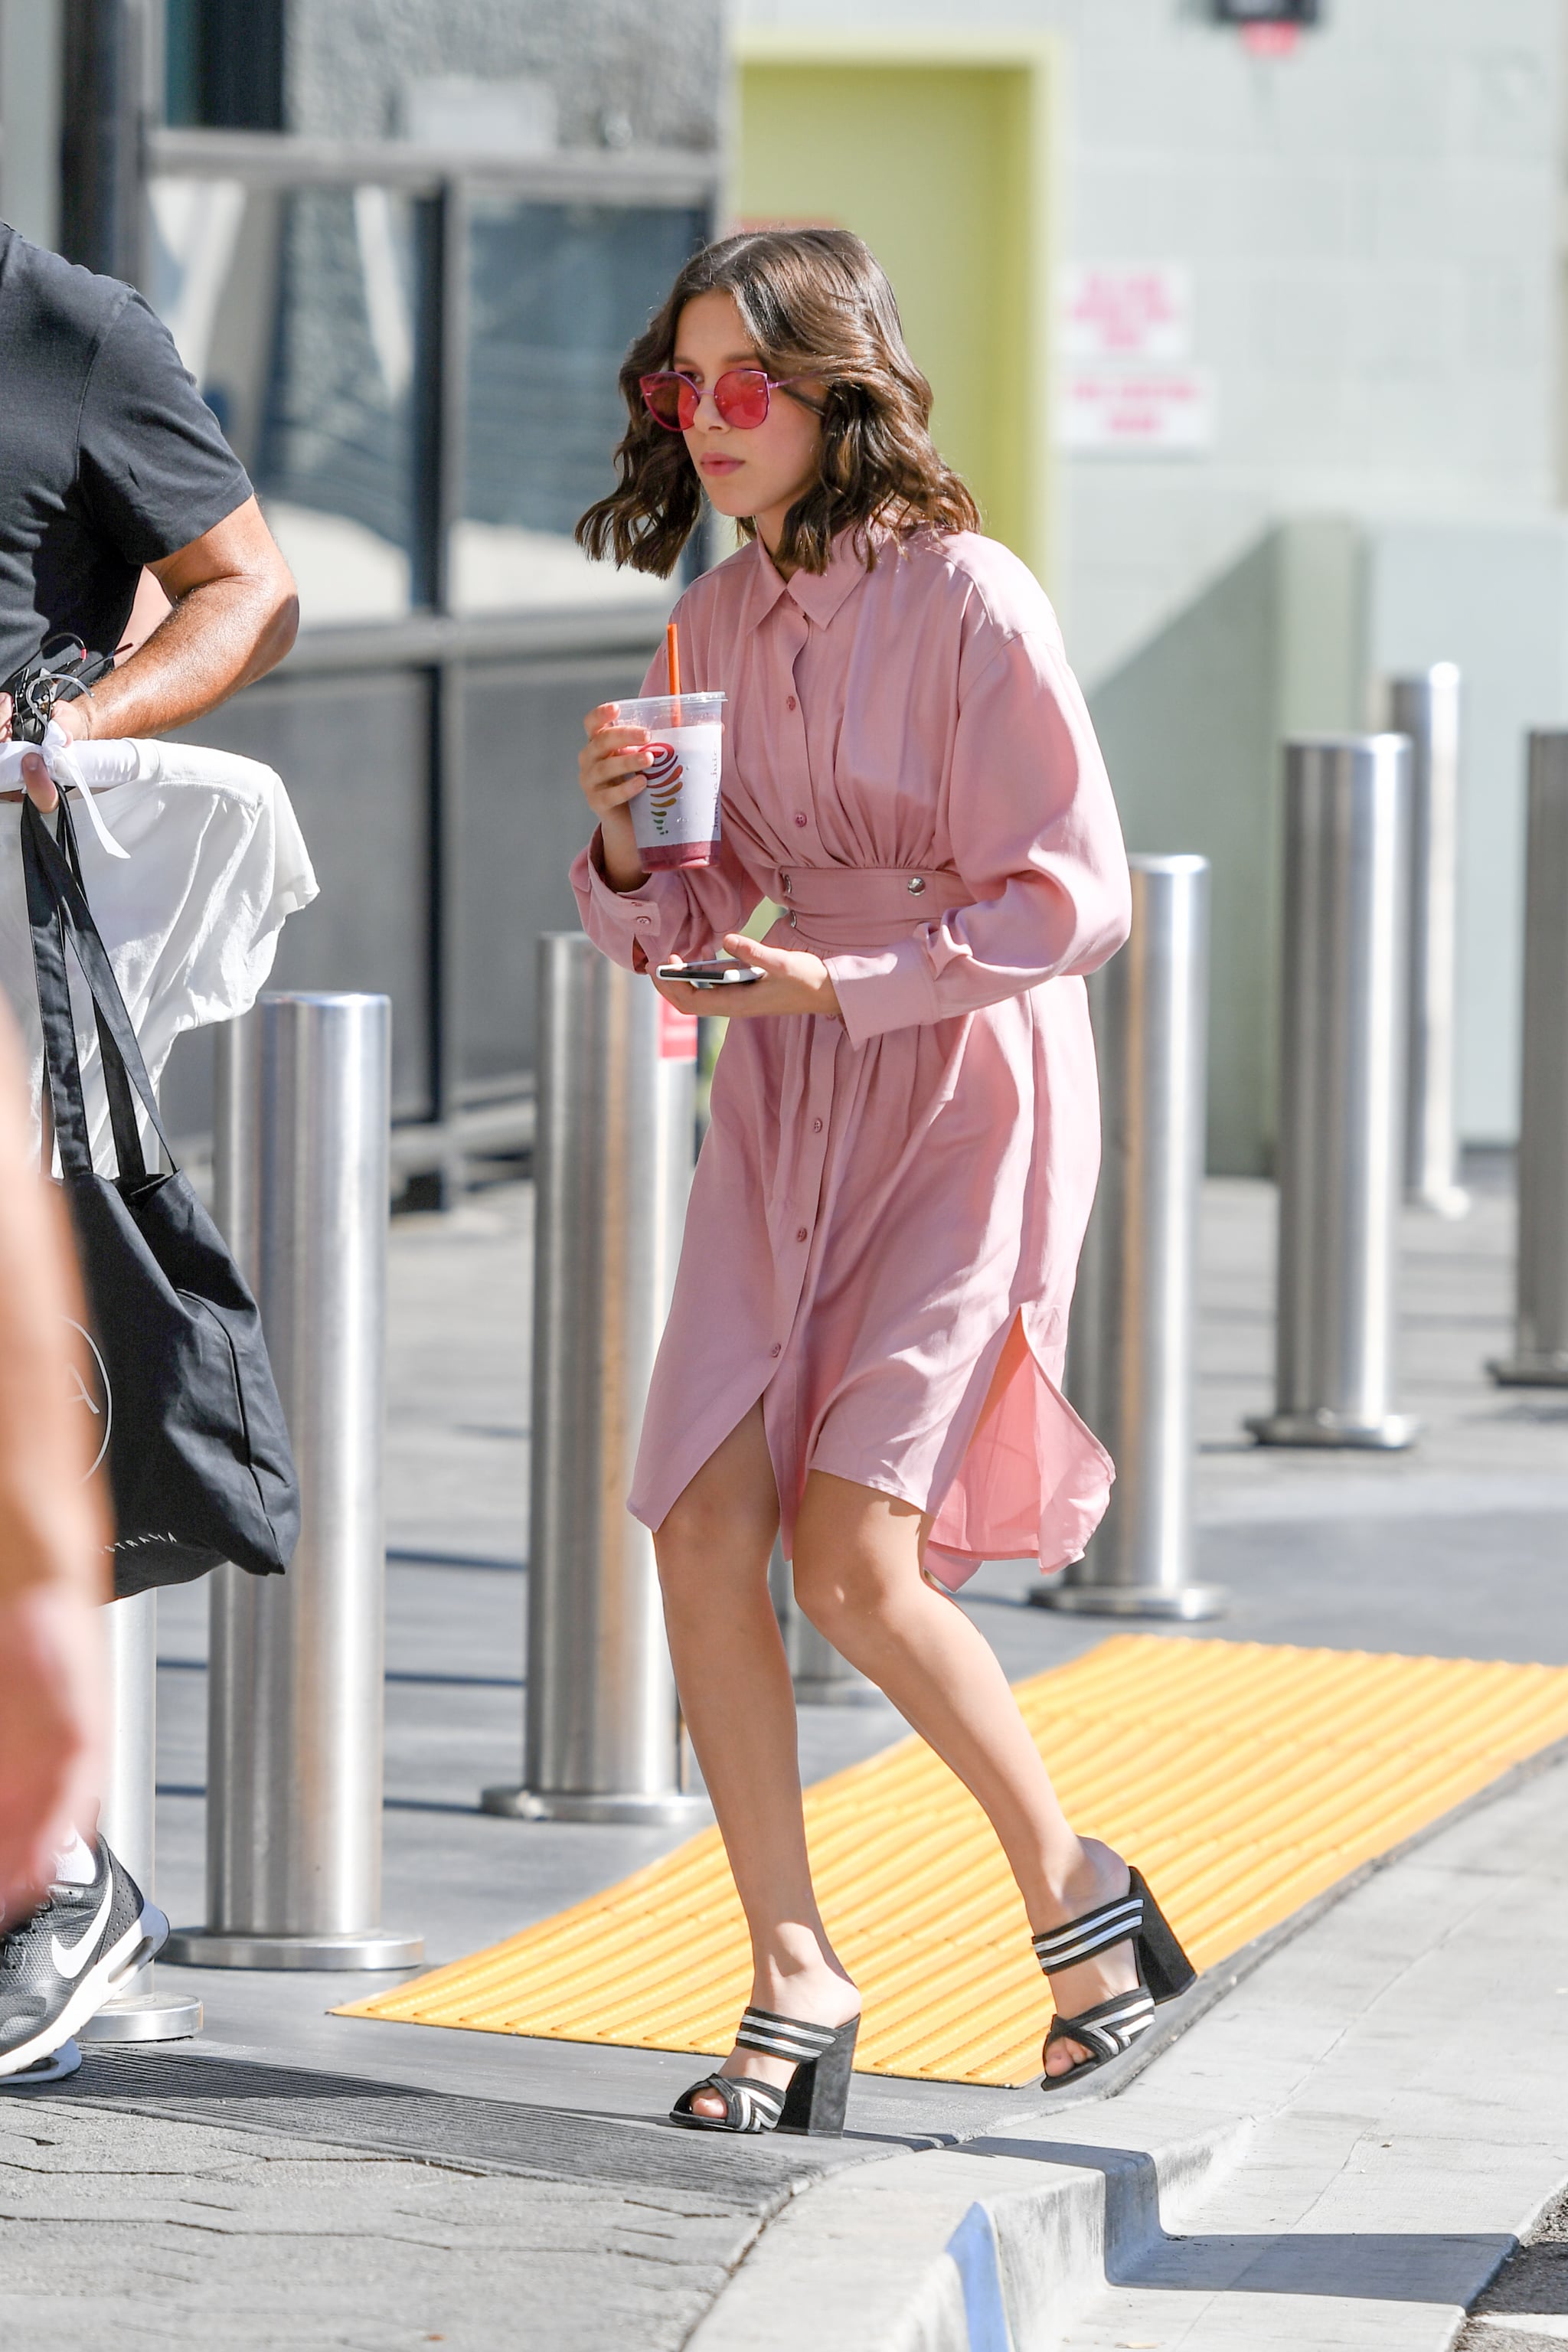 Millie Bobby Brown in a Pink Dress in 2017 | Fact: Millie Bobby Brown's  Street Style Is the Epitome of Cool | POPSUGAR Fashion Photo 15